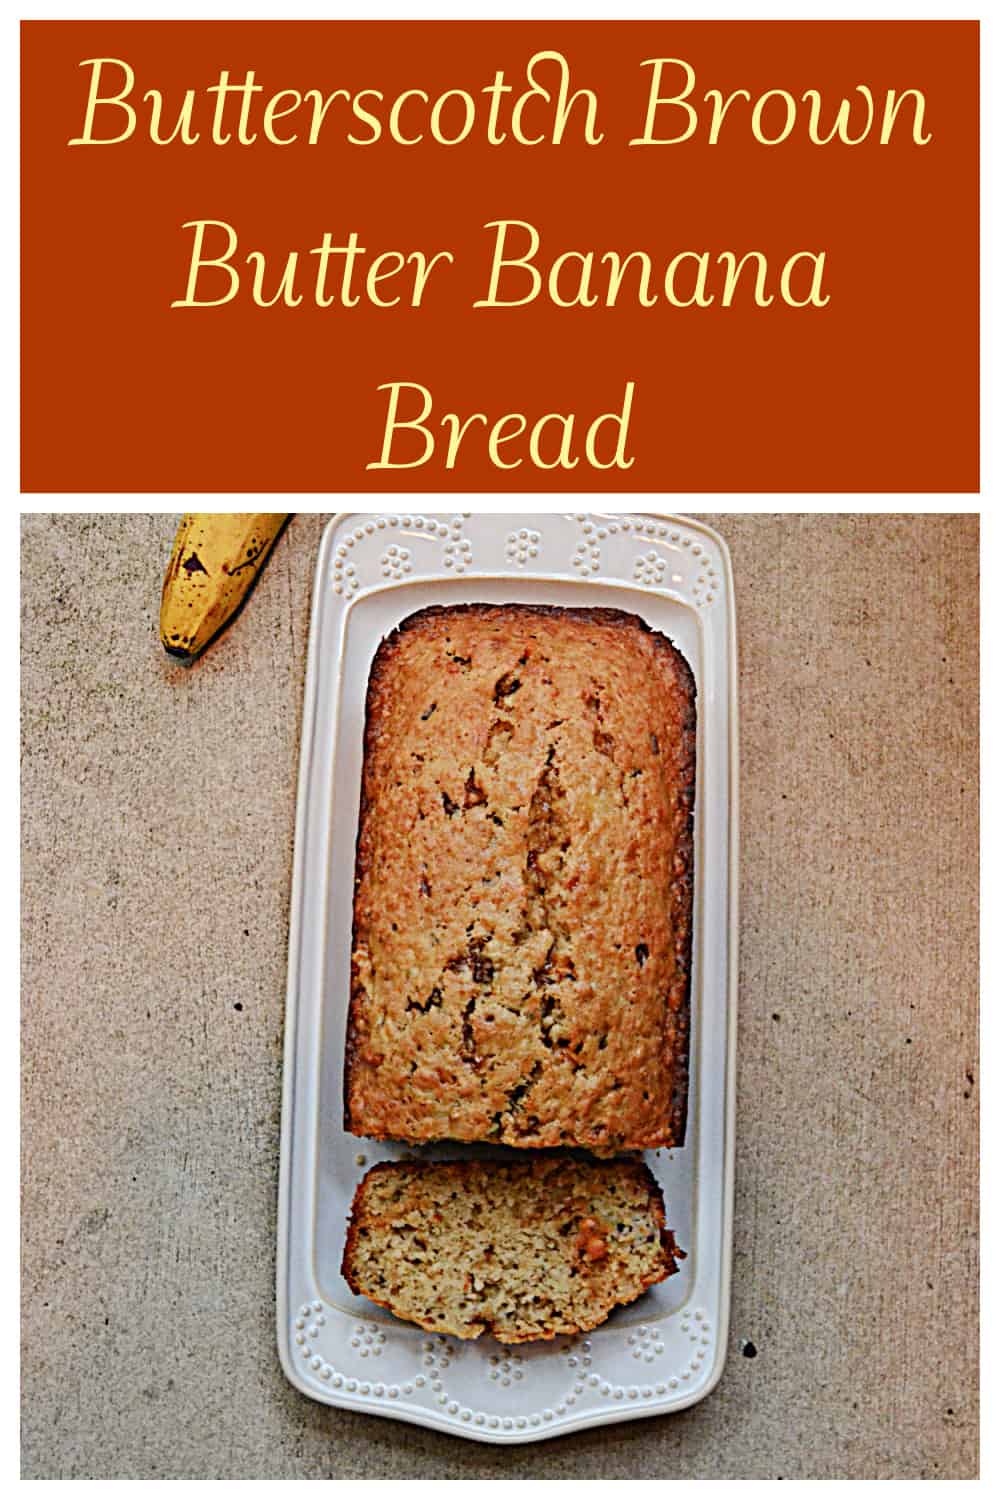 Pin Image:   Text title, a platter with a loaf of banana bread and a slice cut off.